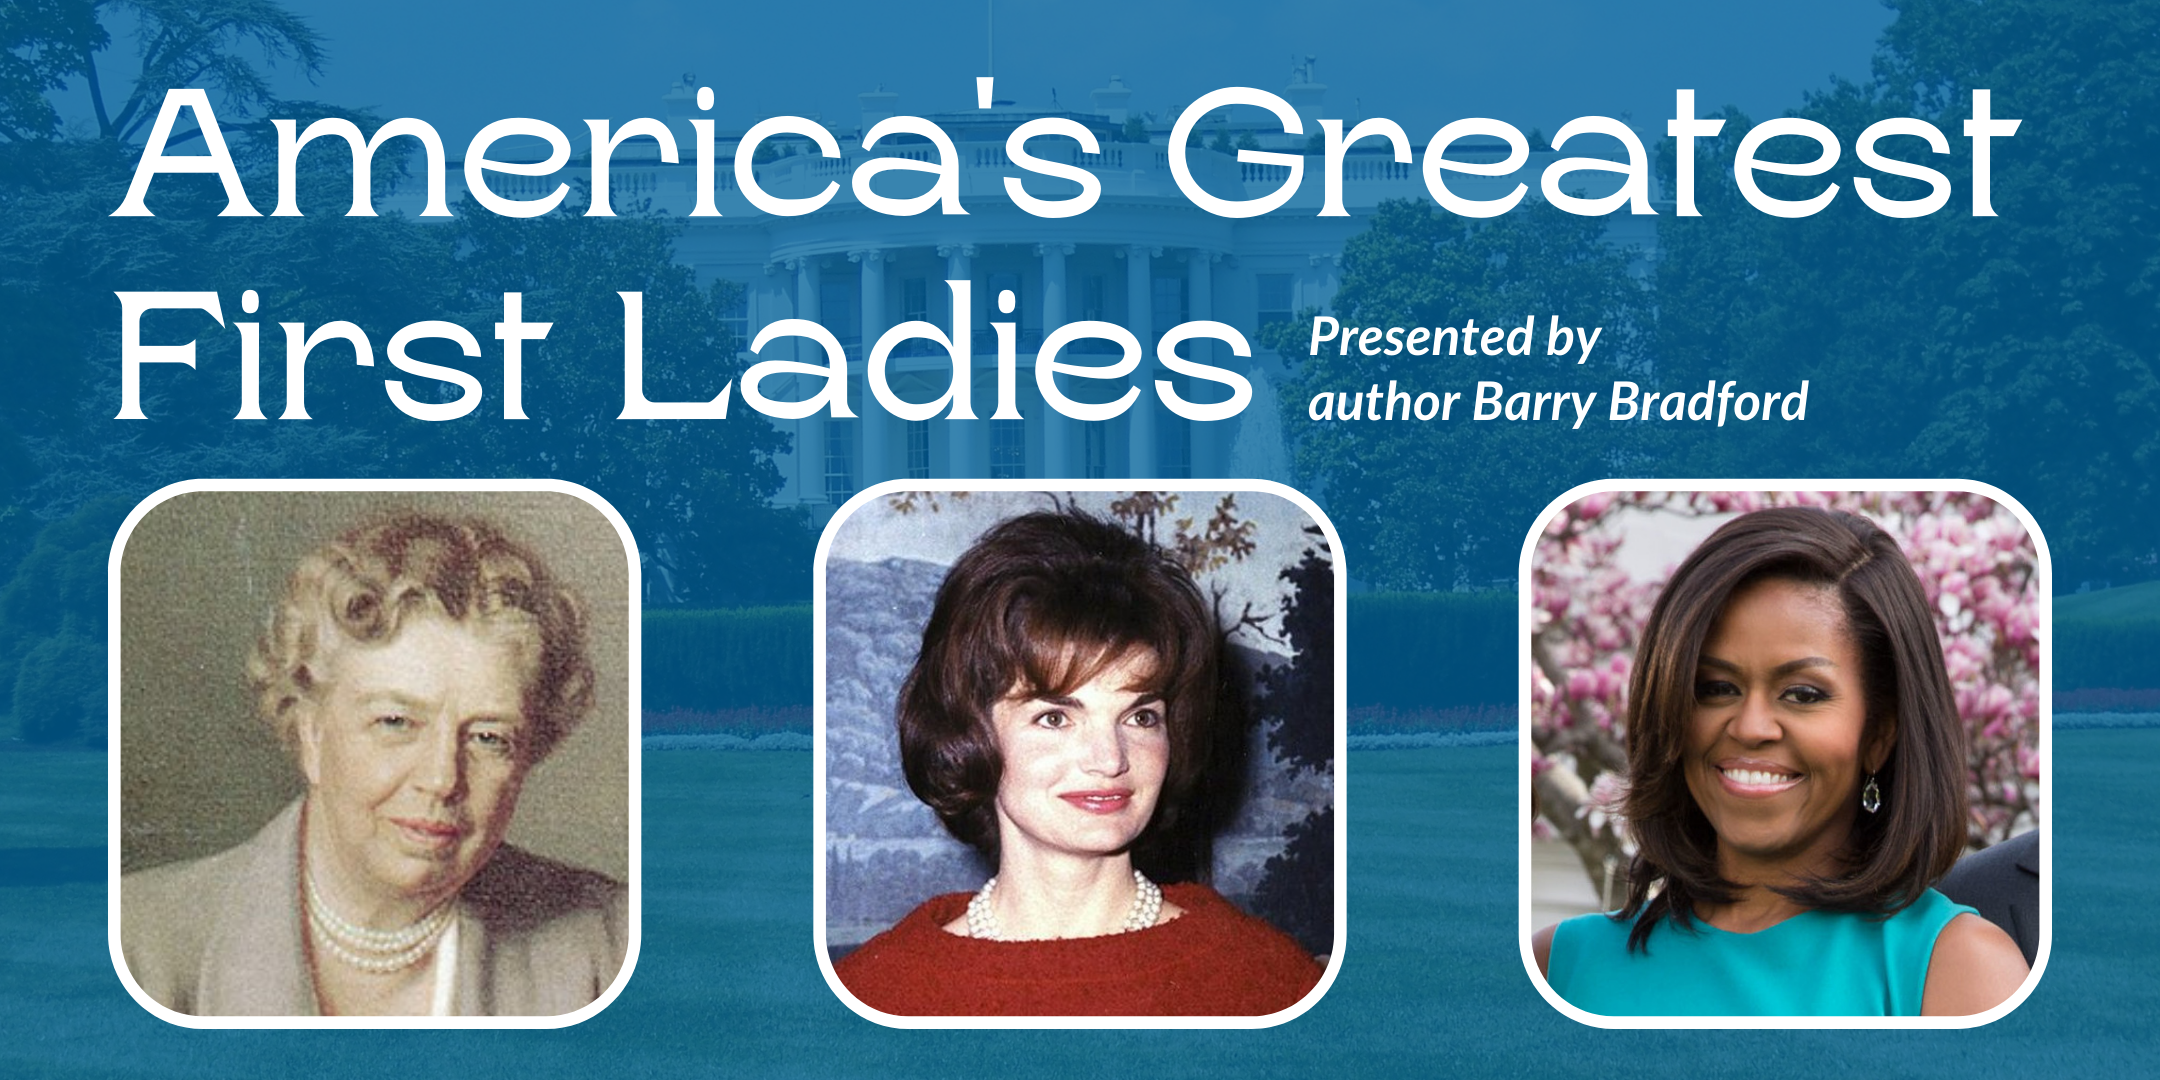 image of "America's Greatest First Ladies"